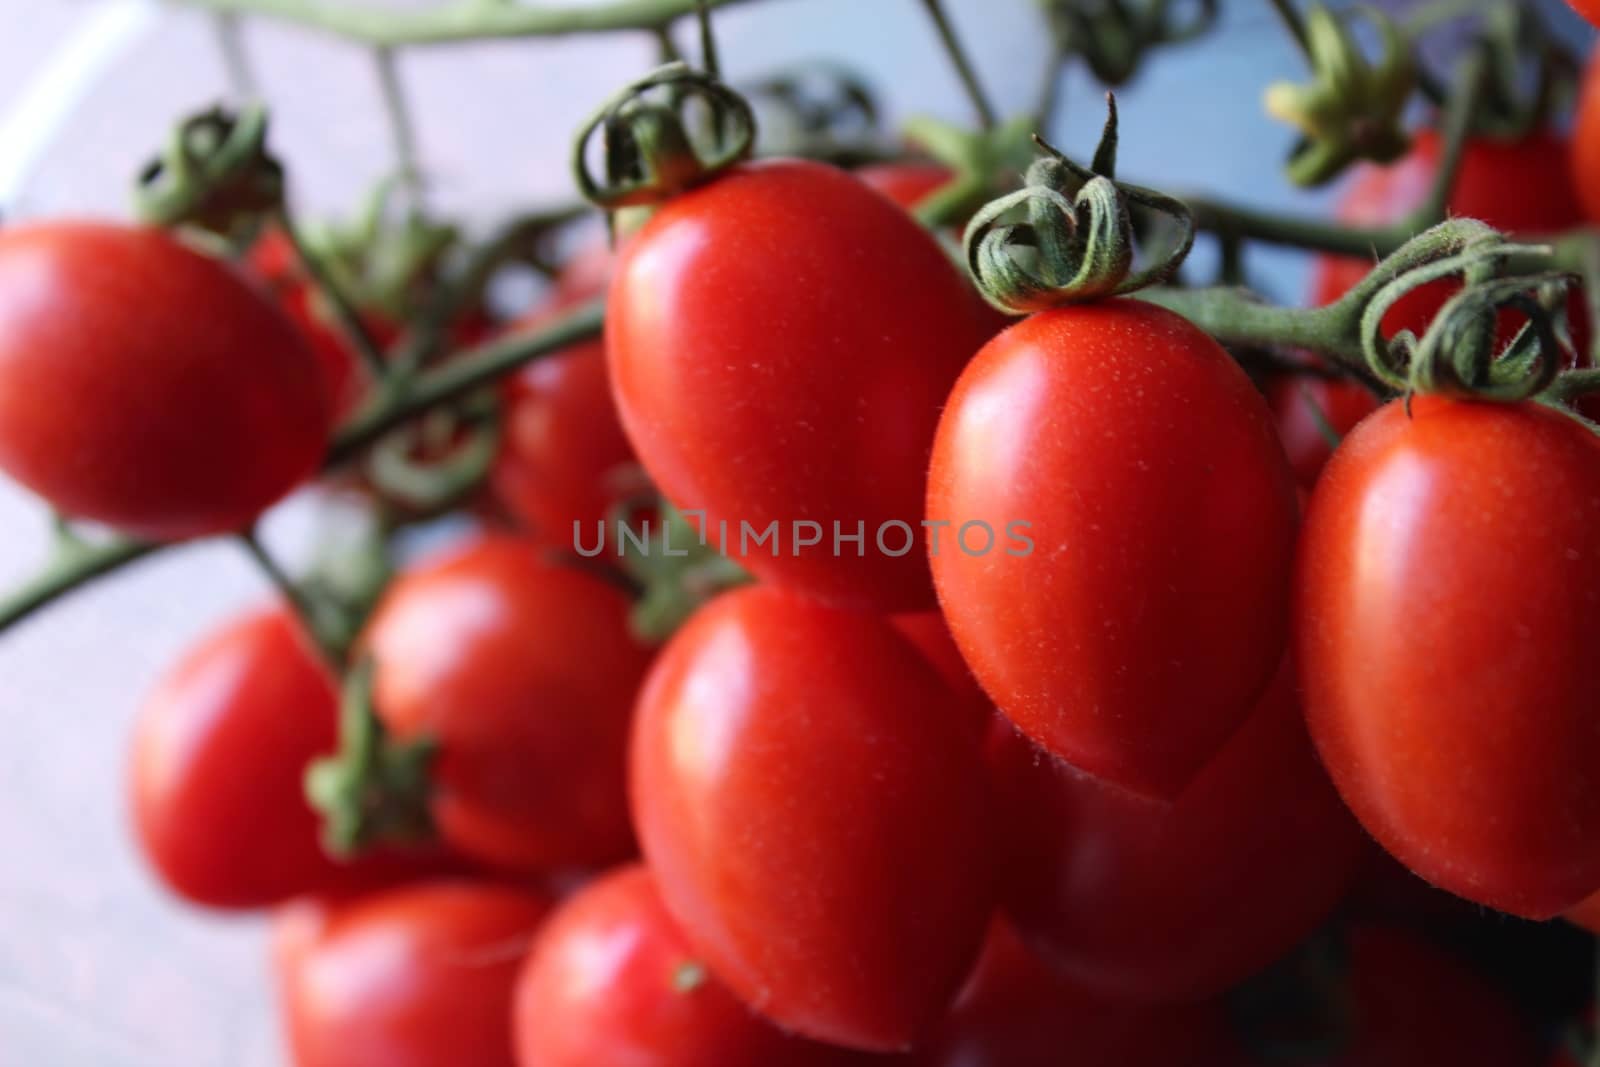 Tomatoes for sale at a market stall by soniabonet